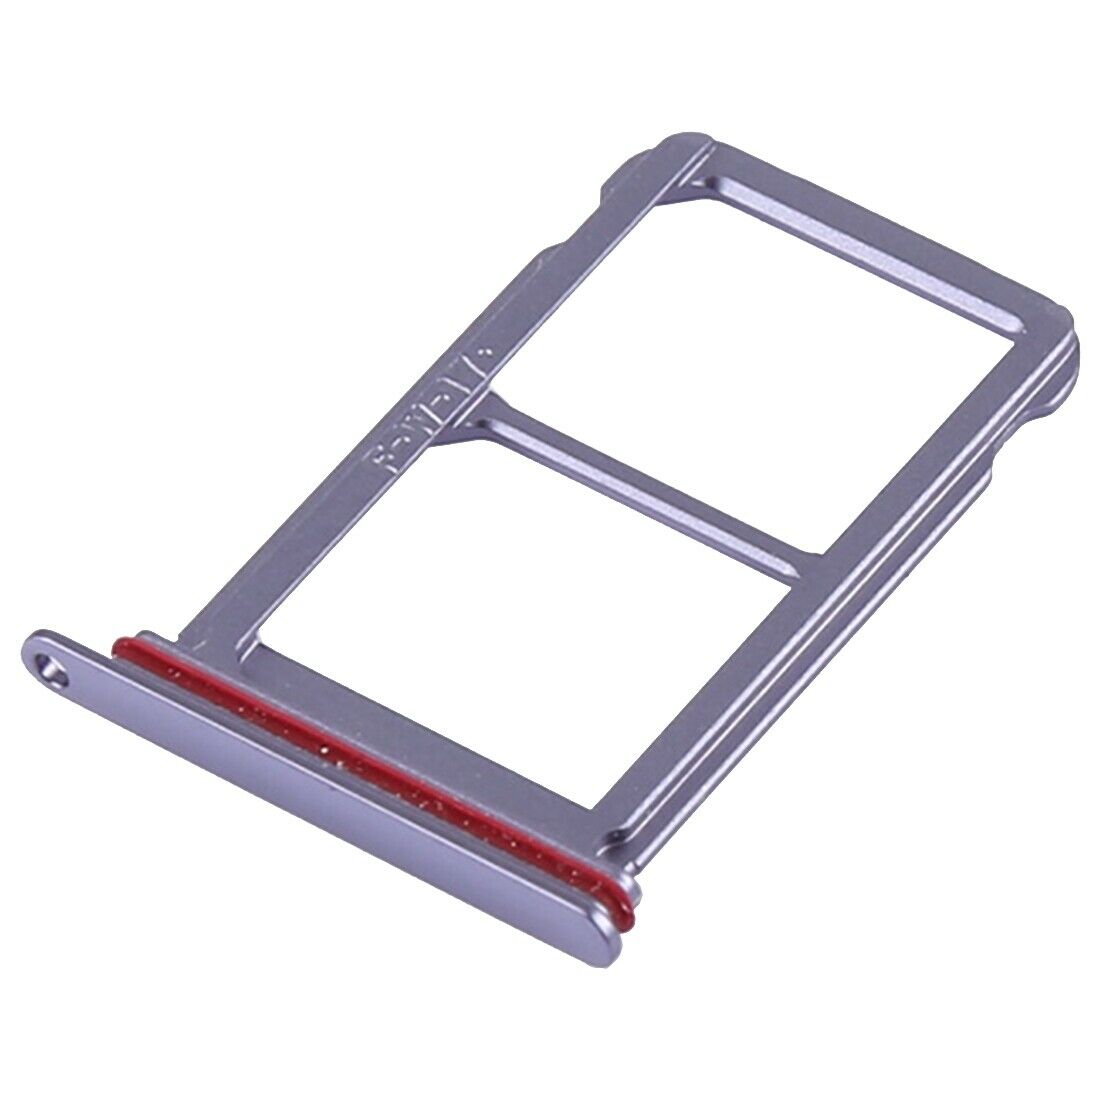 Huawei P20 Pro - Dual SIM Card Holder Tray Slot Twilight & Waterproof Seal for [product_price] - First Help Tech